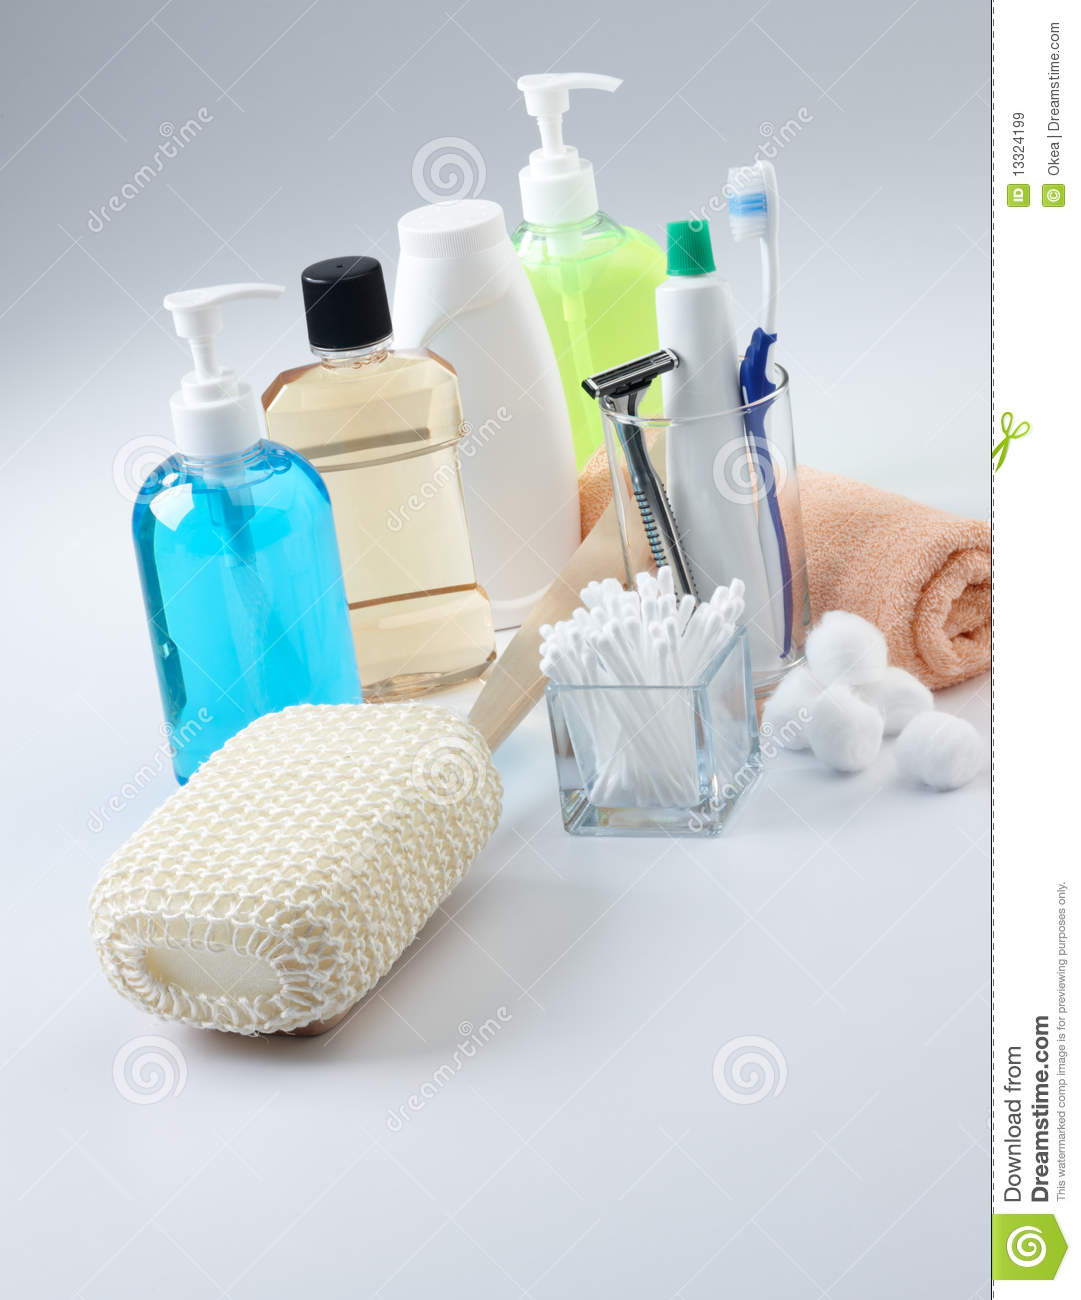 Assorted Personal Hygiene Products On Plain Background